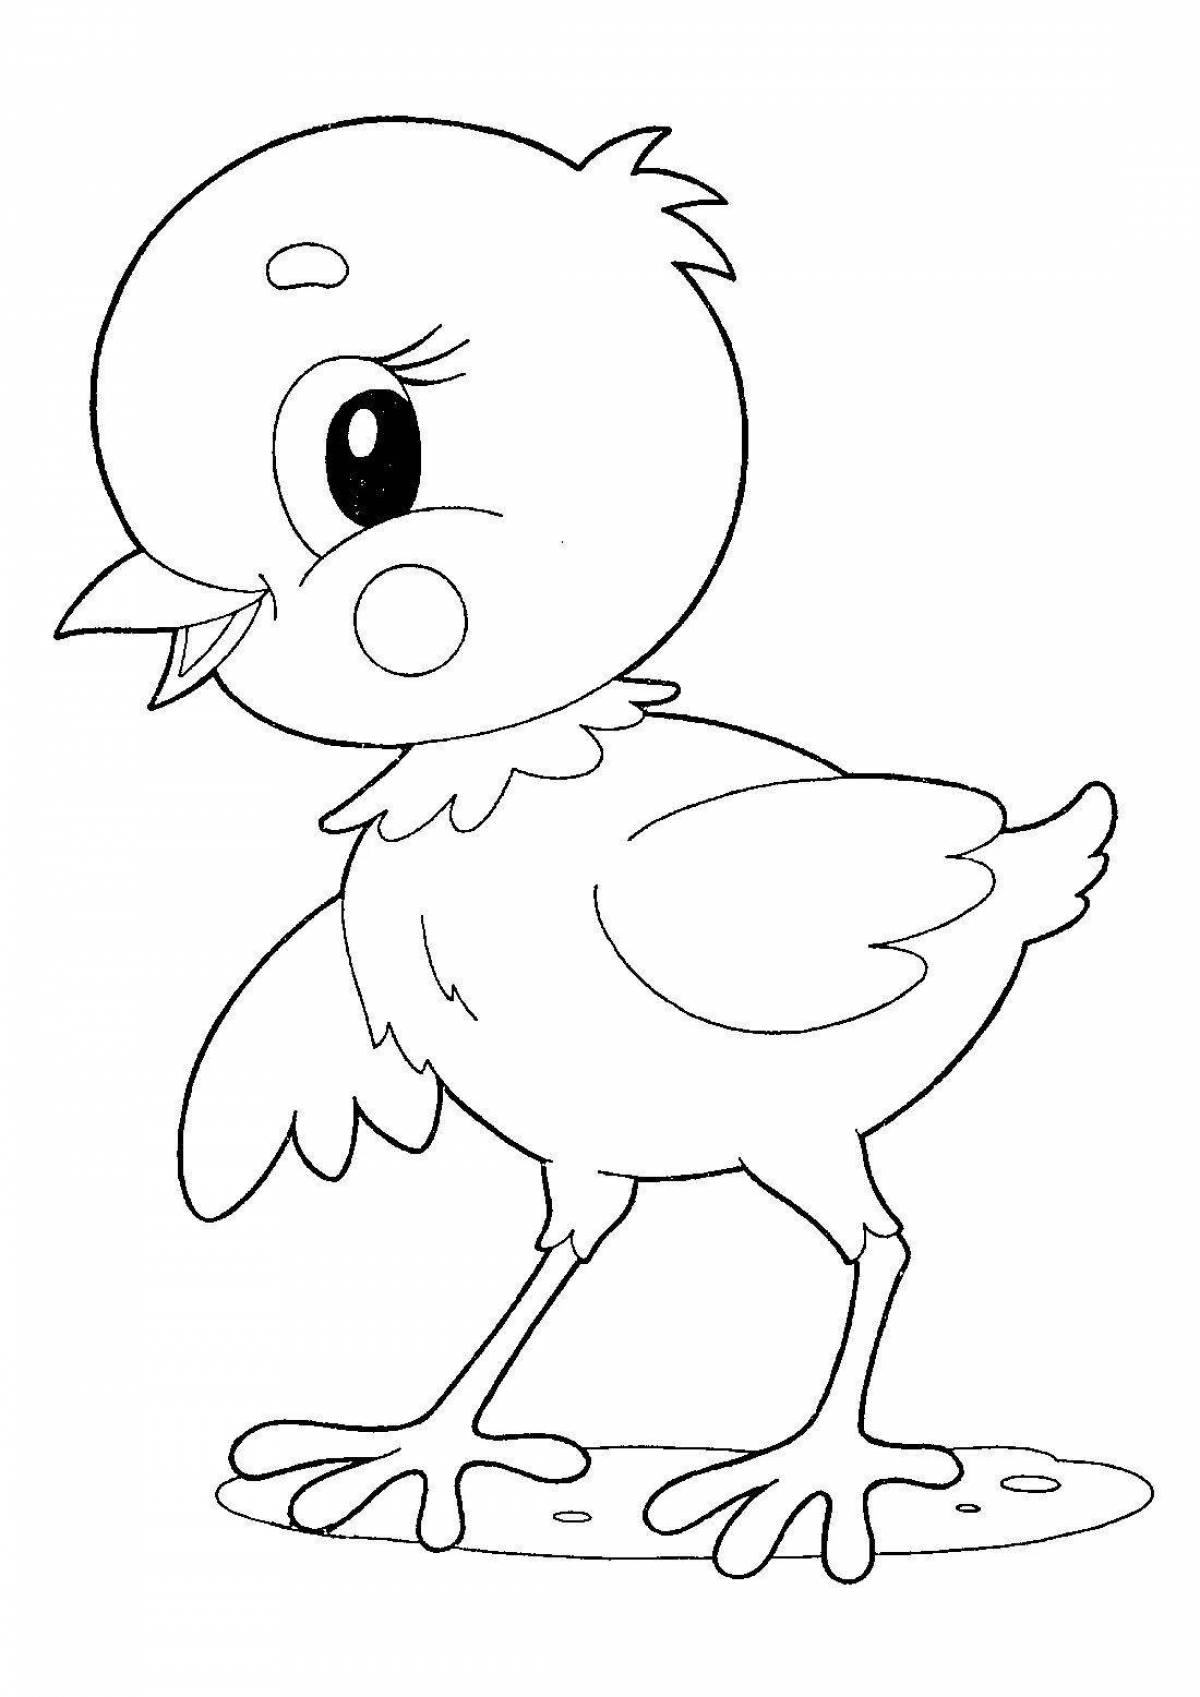 Chick and duck coloring page